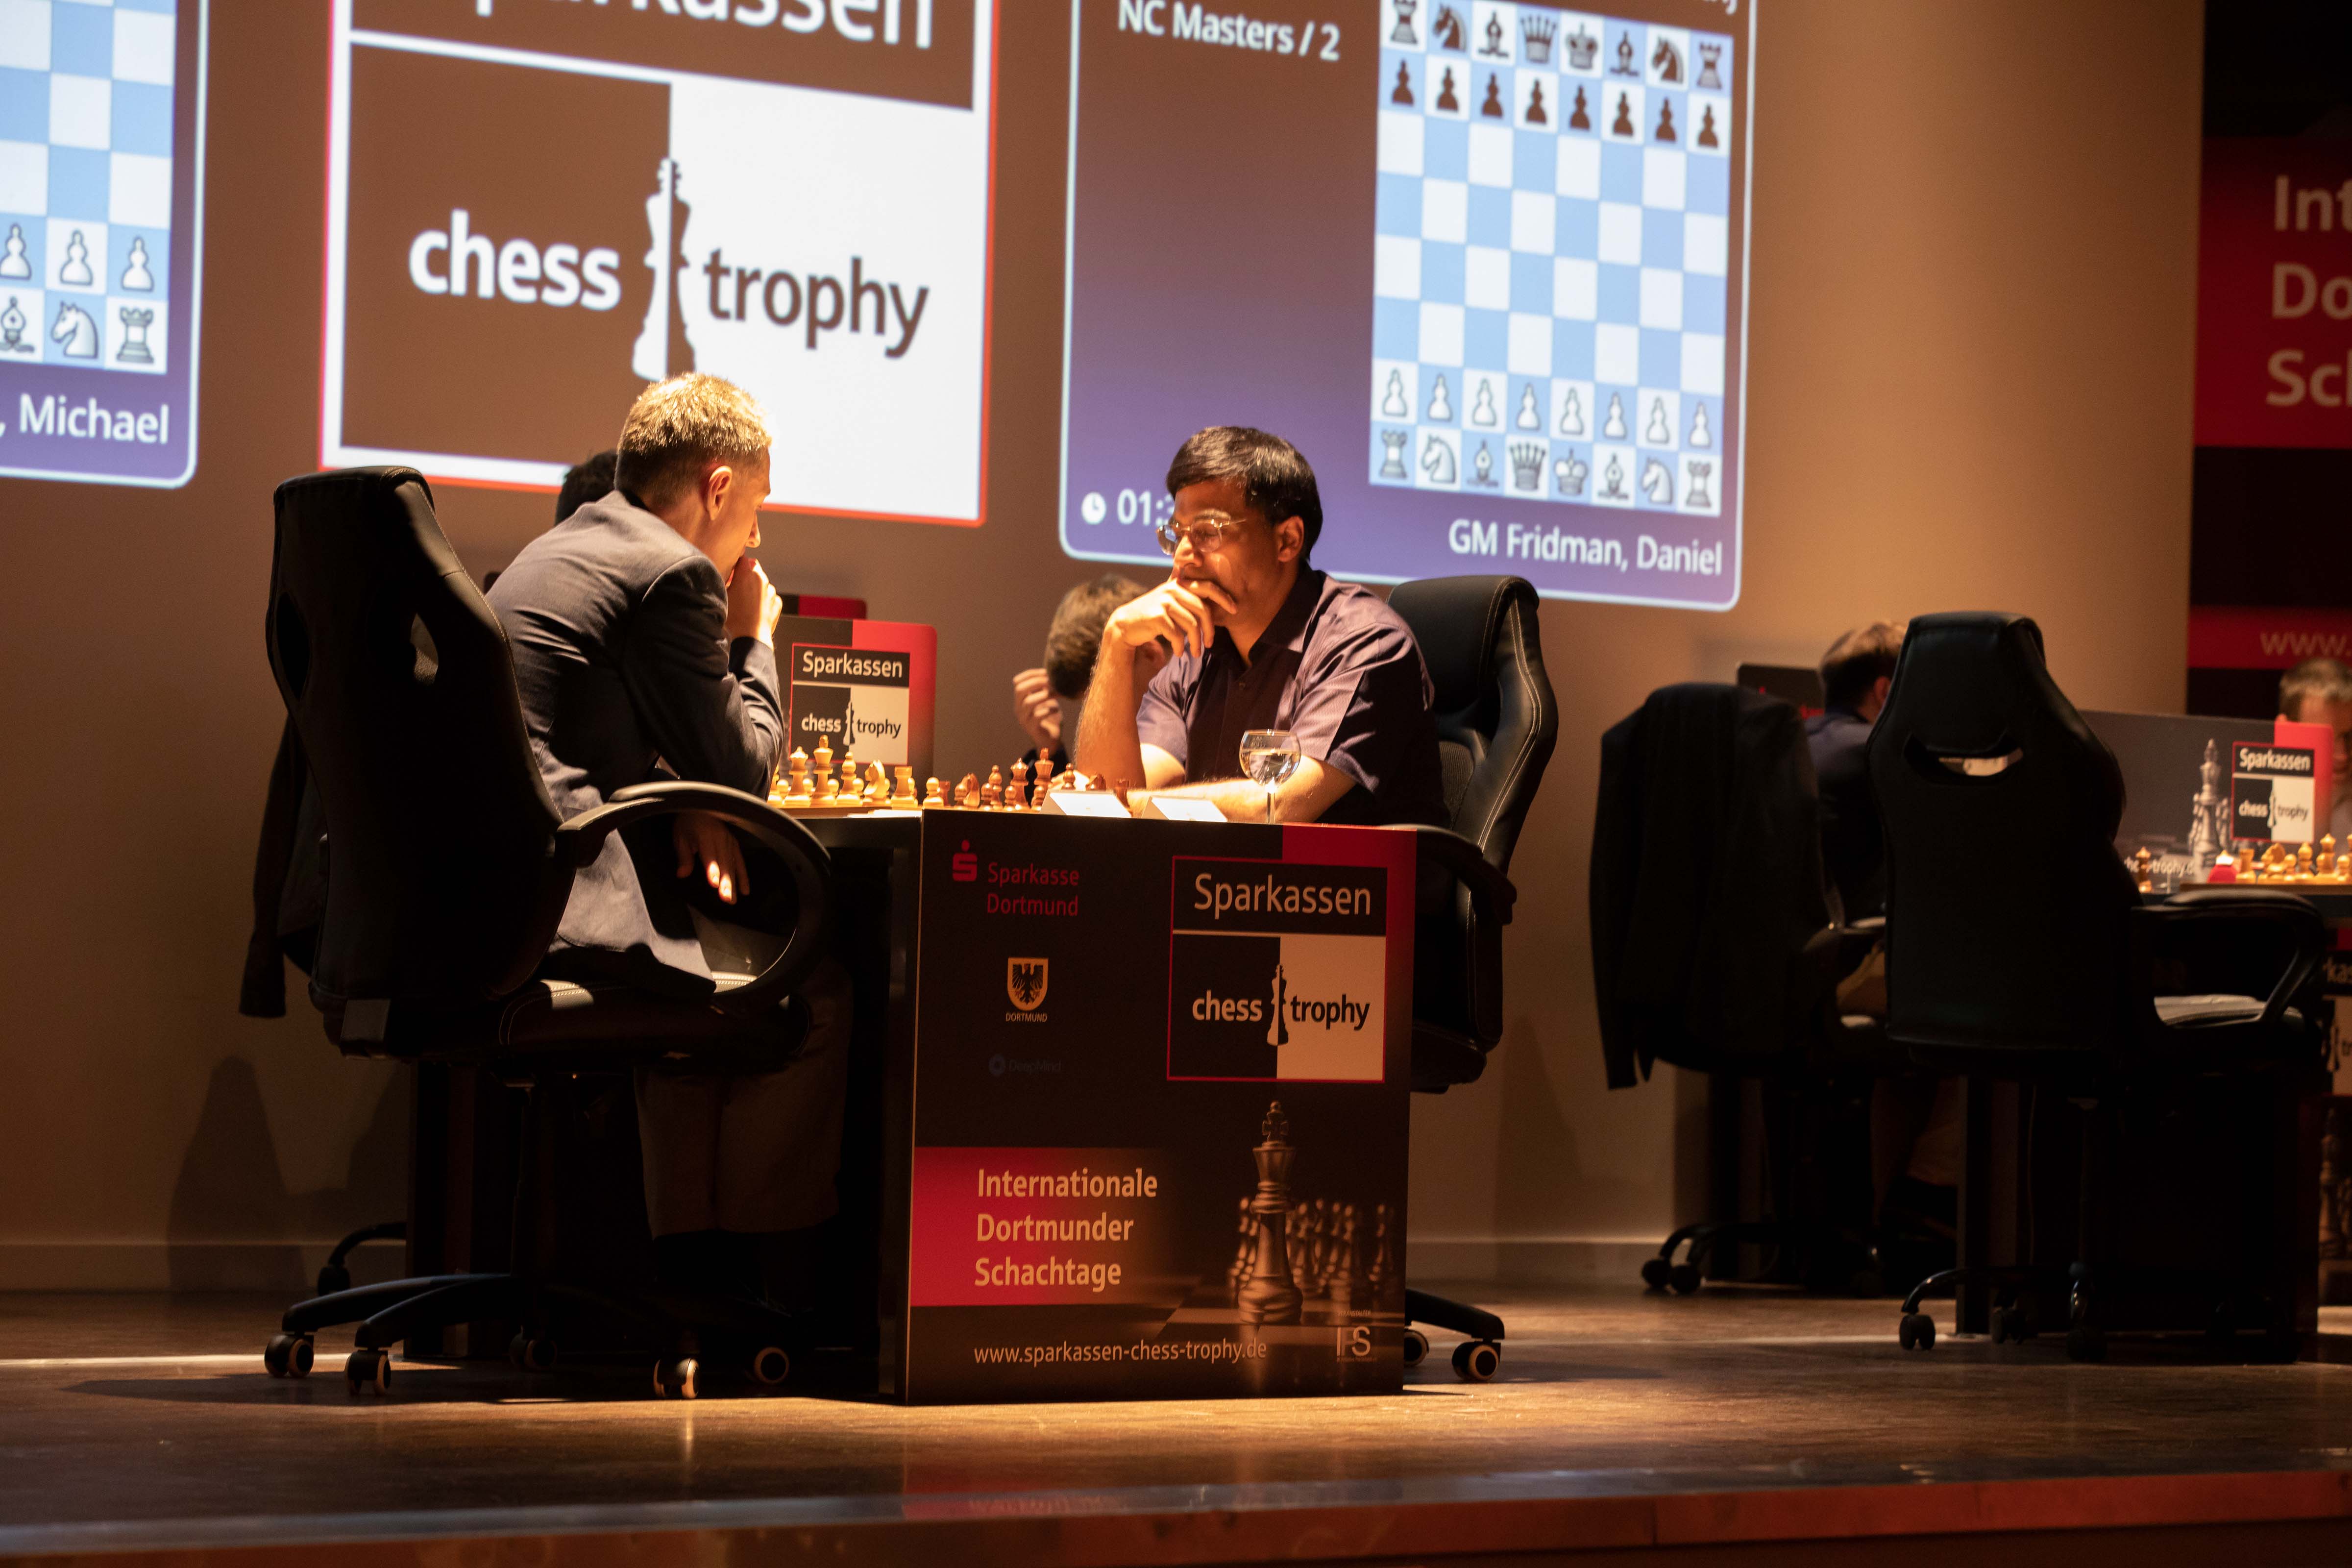 Viswanathan Anand starts with a draw in the NC World Masters